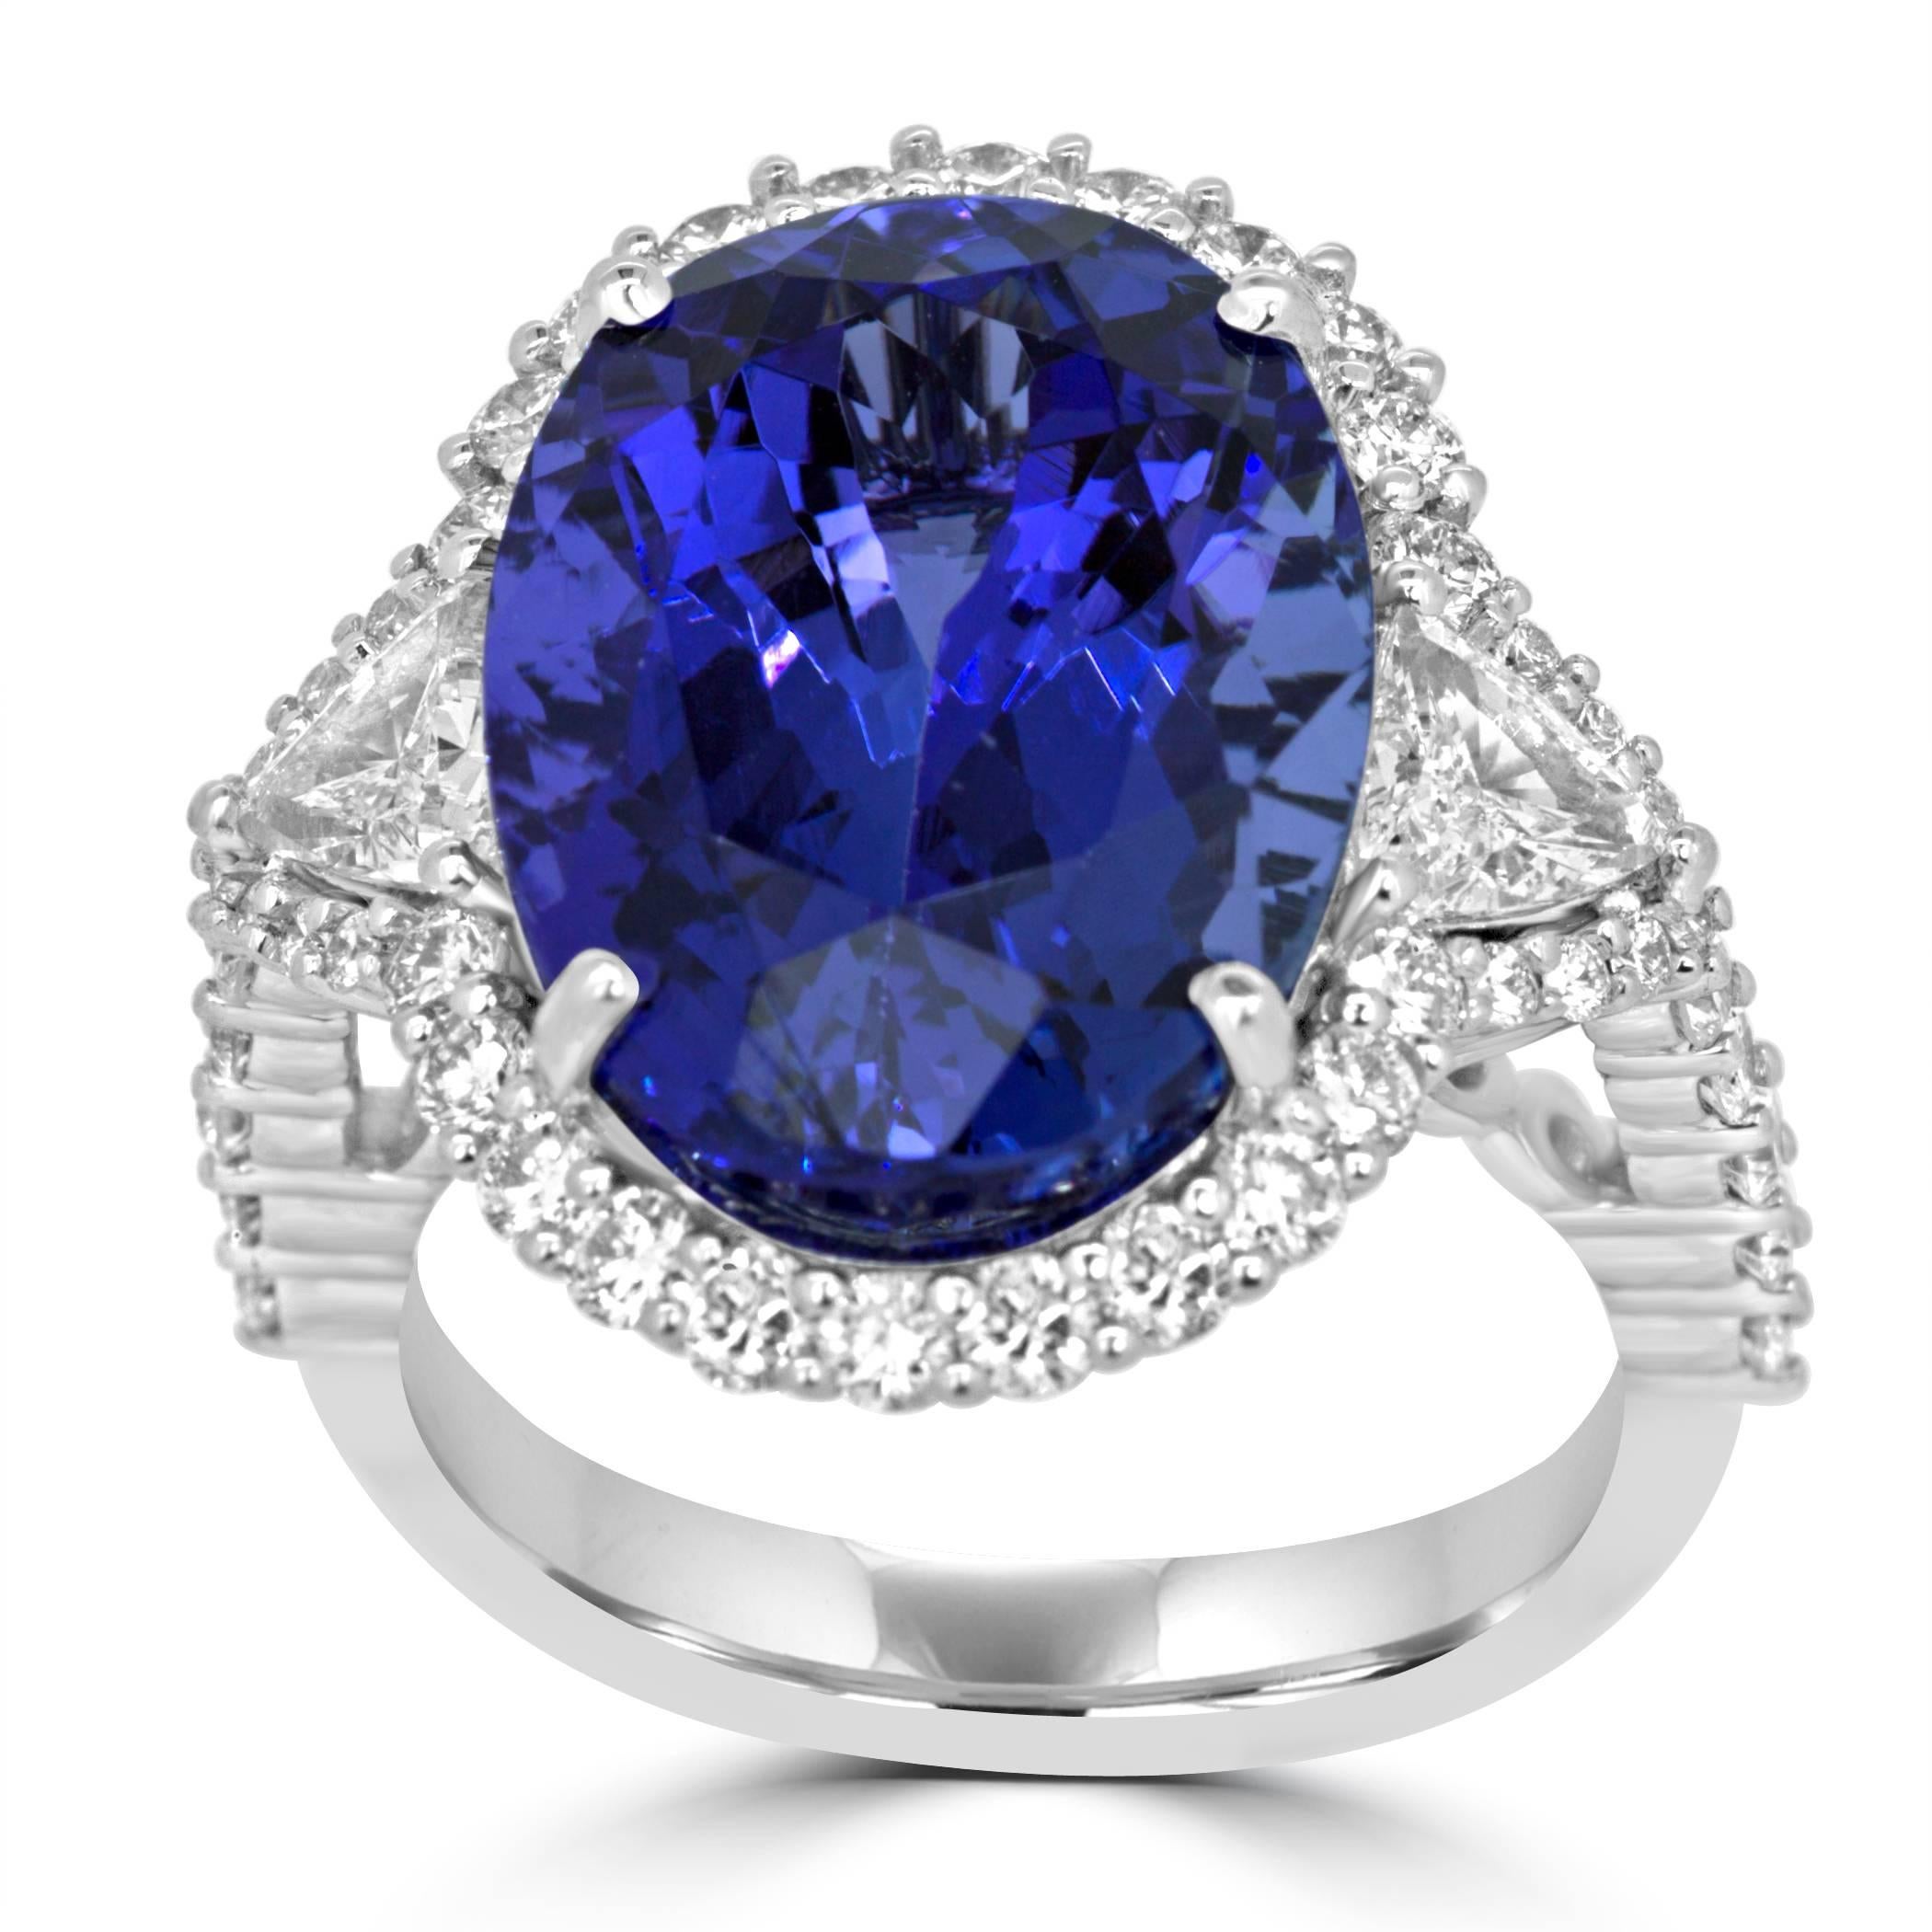 Stunning Tanzanite Oval 11.46 Carat encircled in a single Halo of White Round Diamonds 0.95 Carat Flanked by 2 Diamond Trillion 0.53 Carat on side in 14K White Gold Ring.

MADE IN USA
Total Stone Weight 12.94 Carat